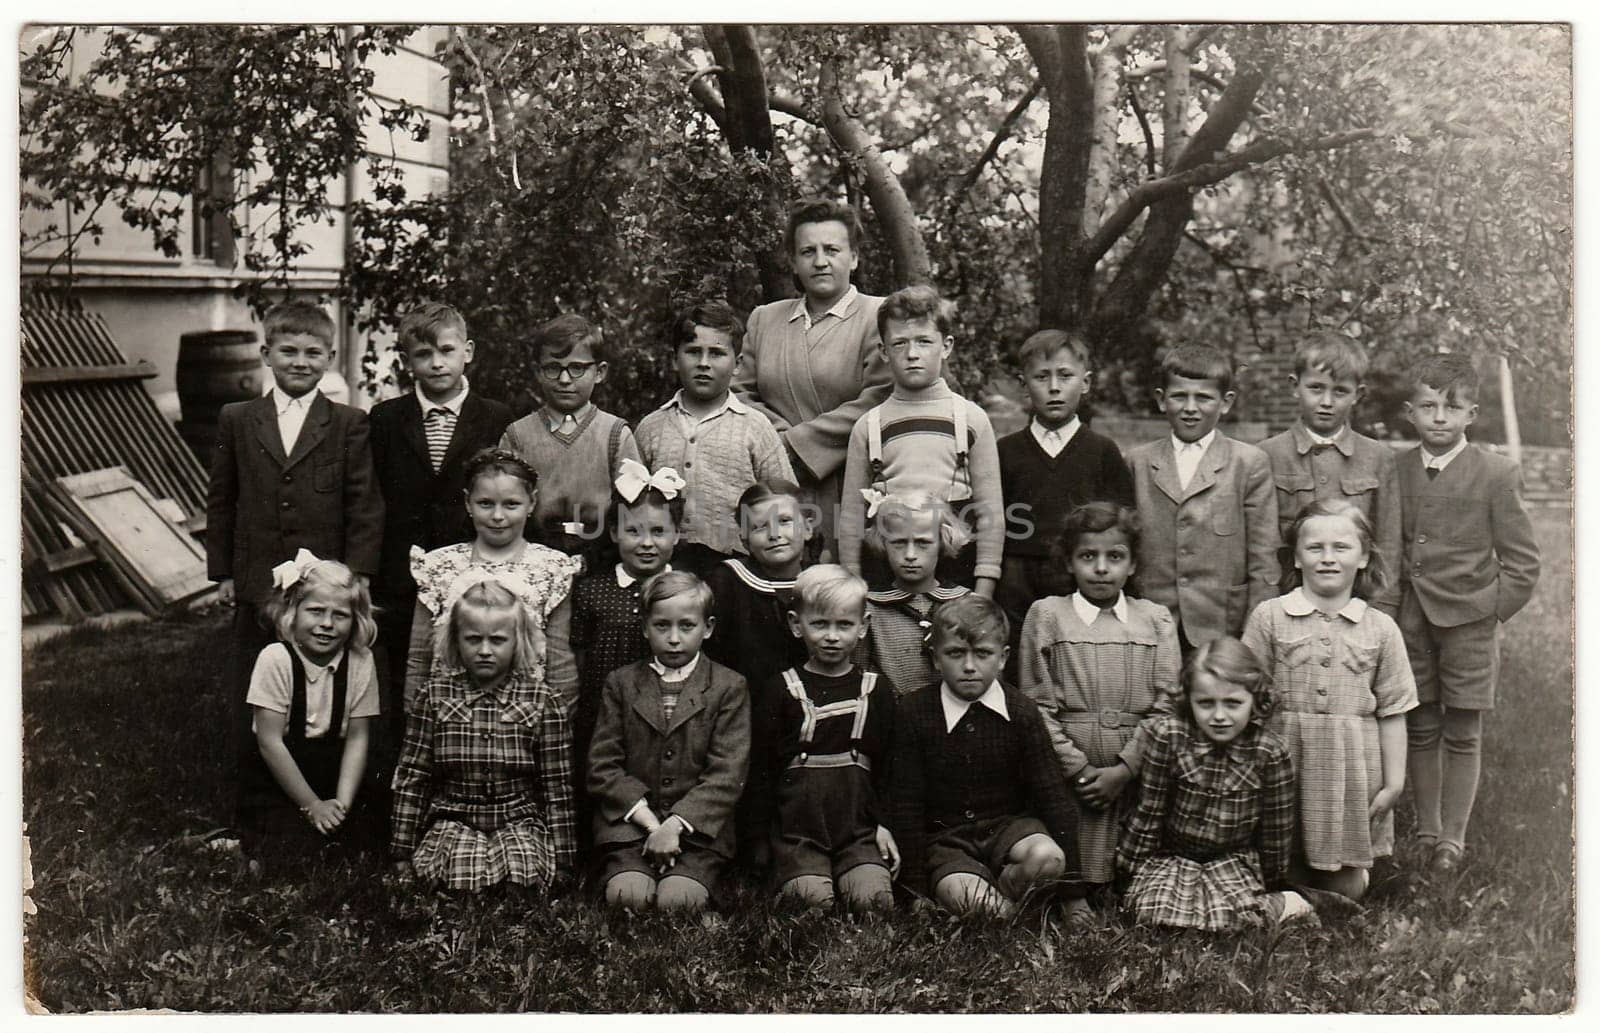 Vintage photo shows classmates (about 10 years old) with teacher by roman_nerud